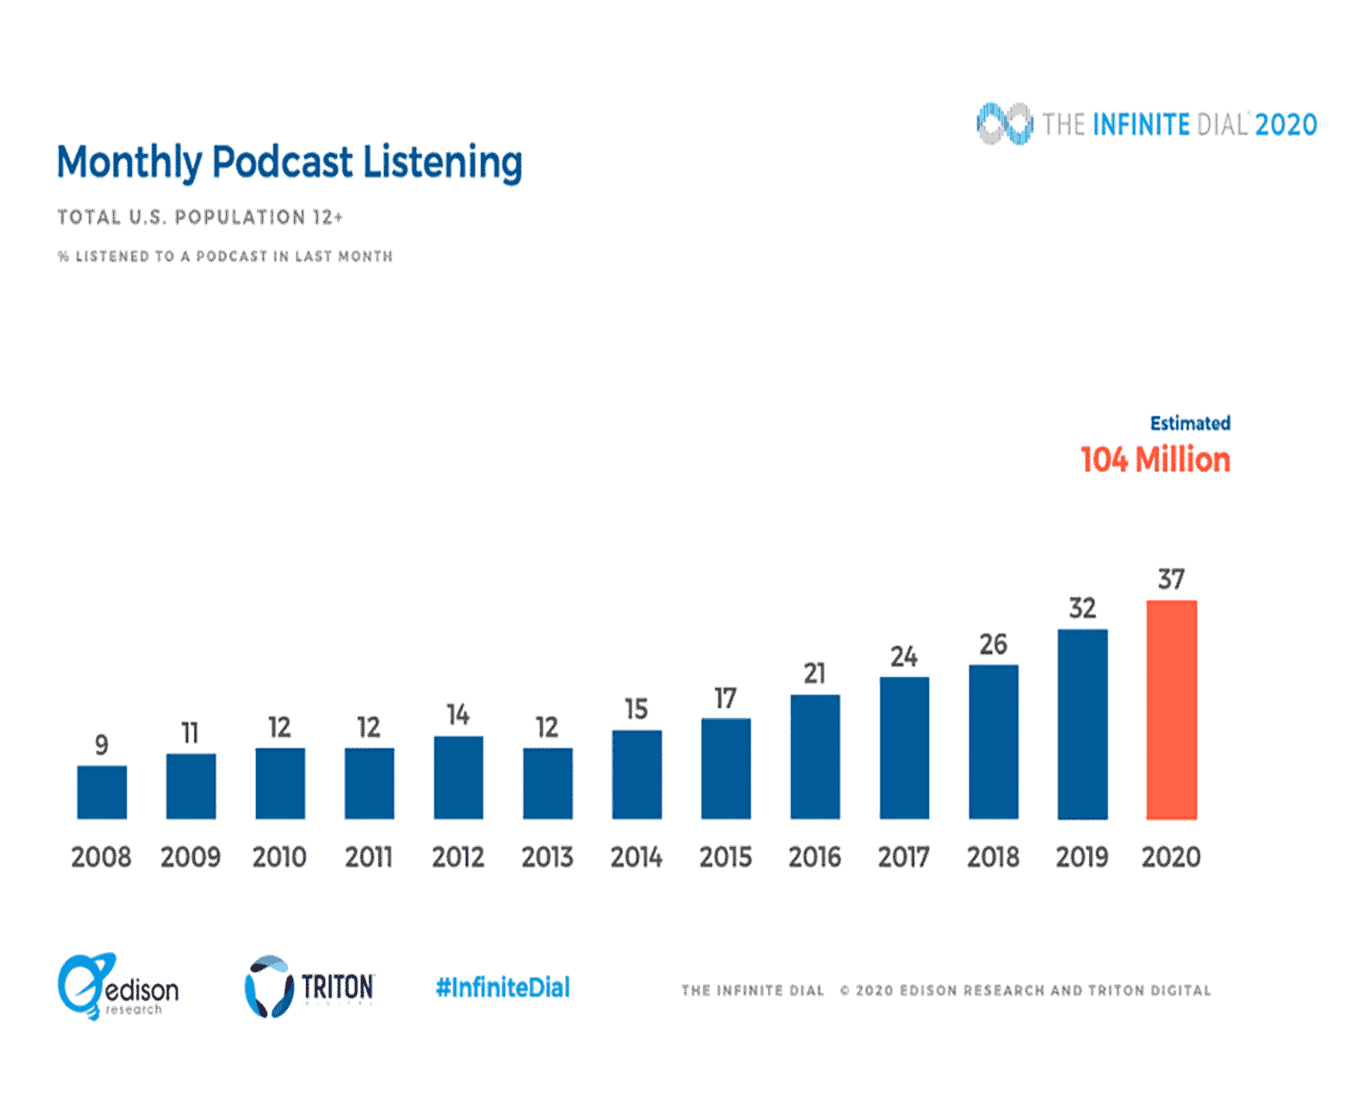 shows a graph from 2008 to 2020 with monthly podcast listening by percentage of the U.S. Population 12+ years old. 9% listened to podcasts in 2008 and 37% listened to podcasts in 2020. This is why trends in manufacturing advertising include the increased use of podcast ads.